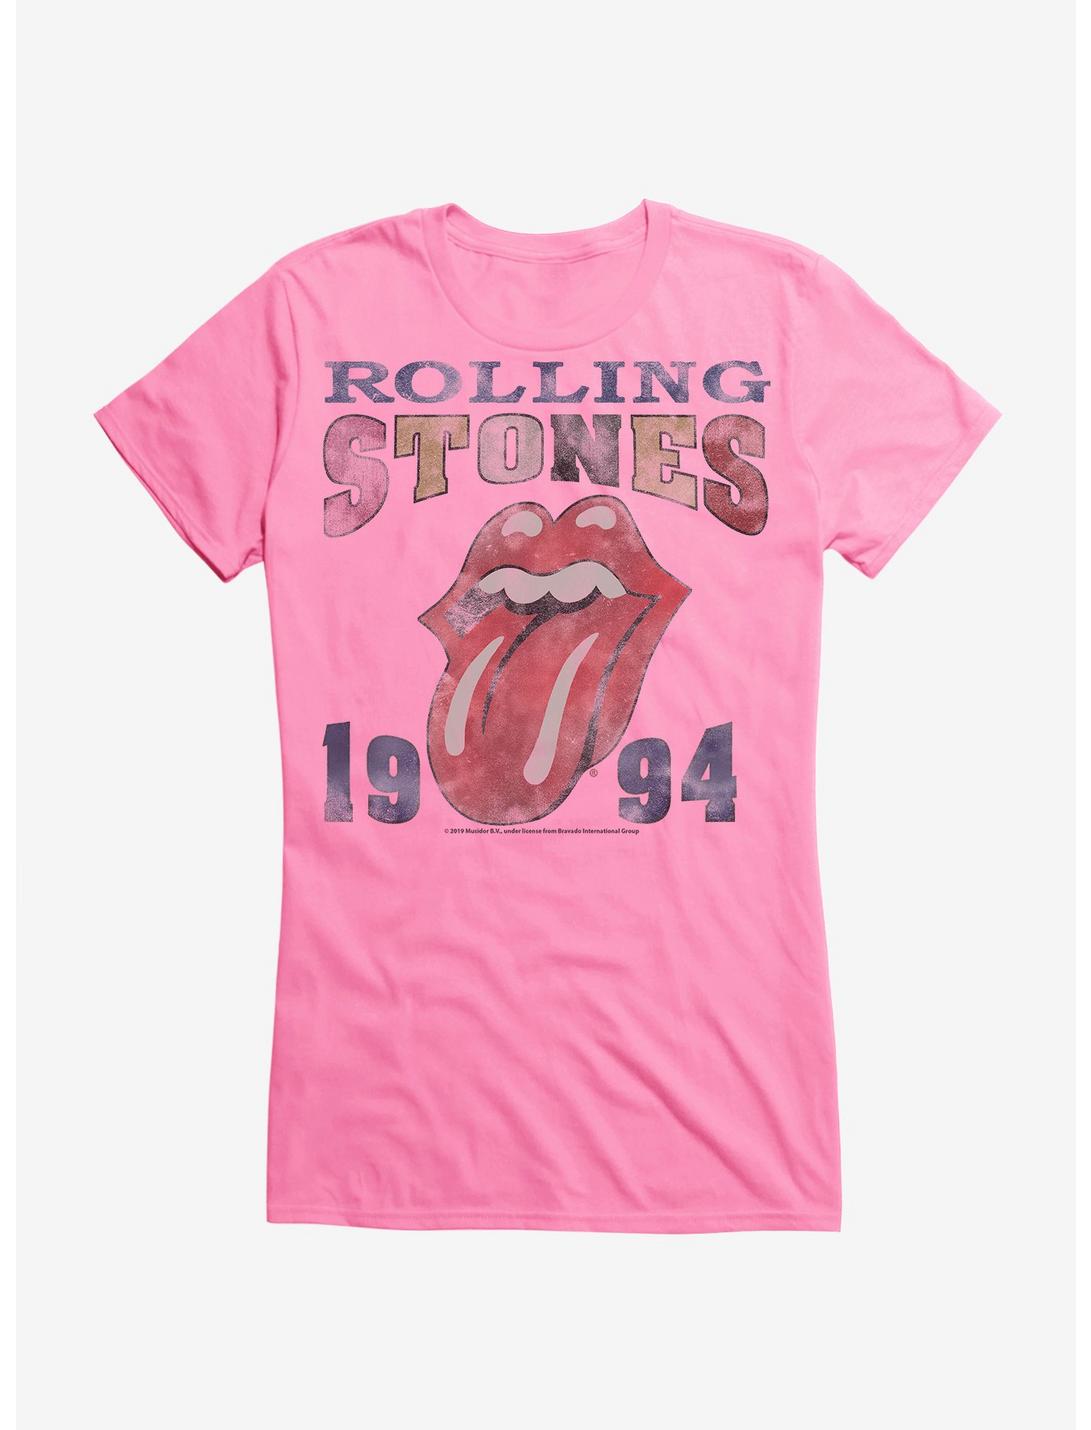 The Rolling Stones 1994 Girls T-Shirt, , hi-res